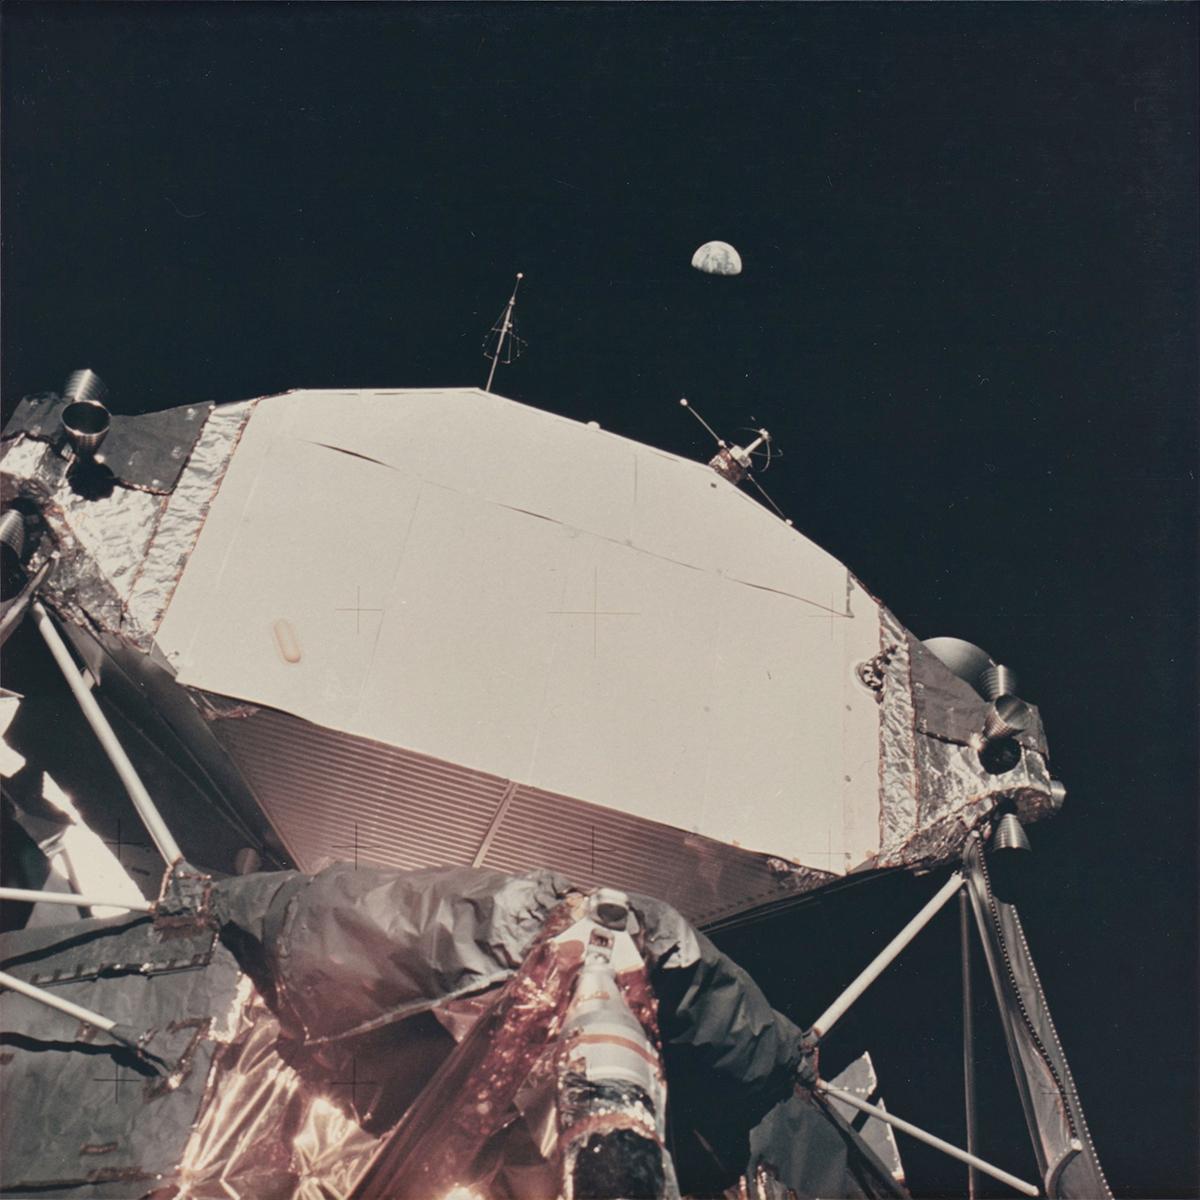 Patrick Parrish is excited to offer an incredible group of original photographs printed by Meisel Photochrome Corporation of Dallas circa 1970, shortly after the Apollo 11 Mission. Meisel was the official photo contractor for NASA and processed all